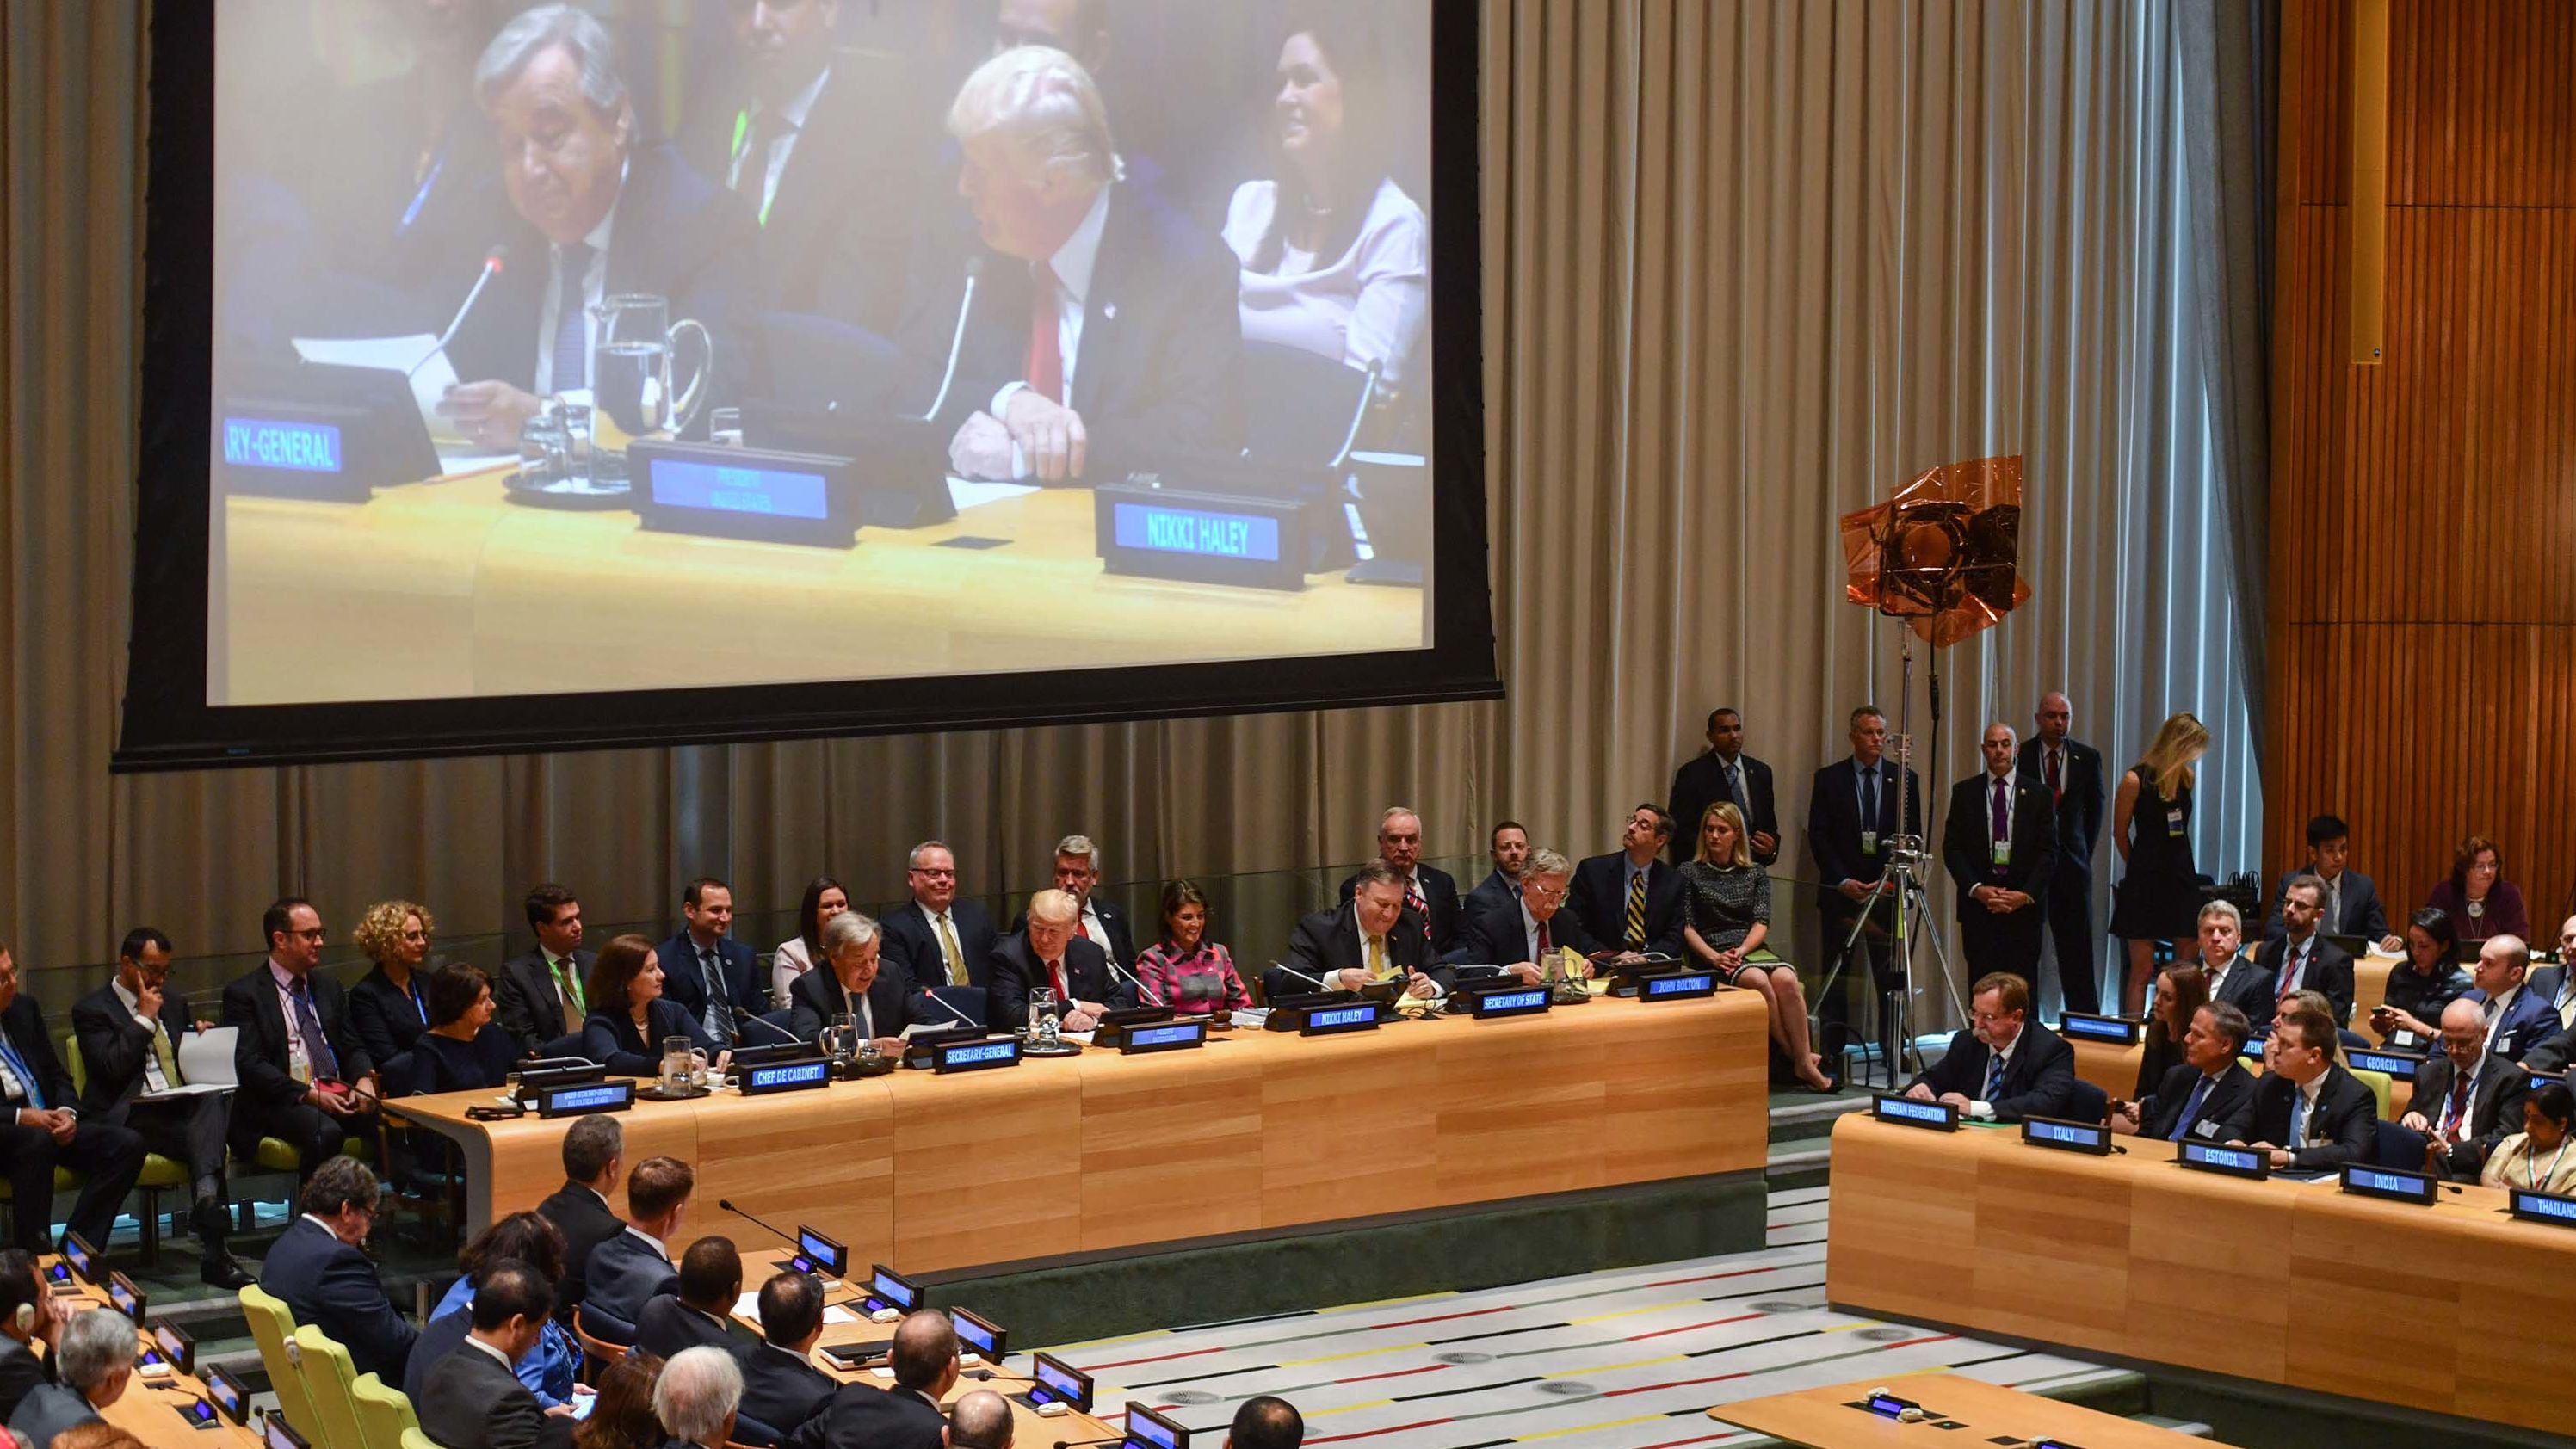 Guterres talks during the drug summit on Monday. "Some 450,000 people die every year from overdoses or drug-related health issues," he said.